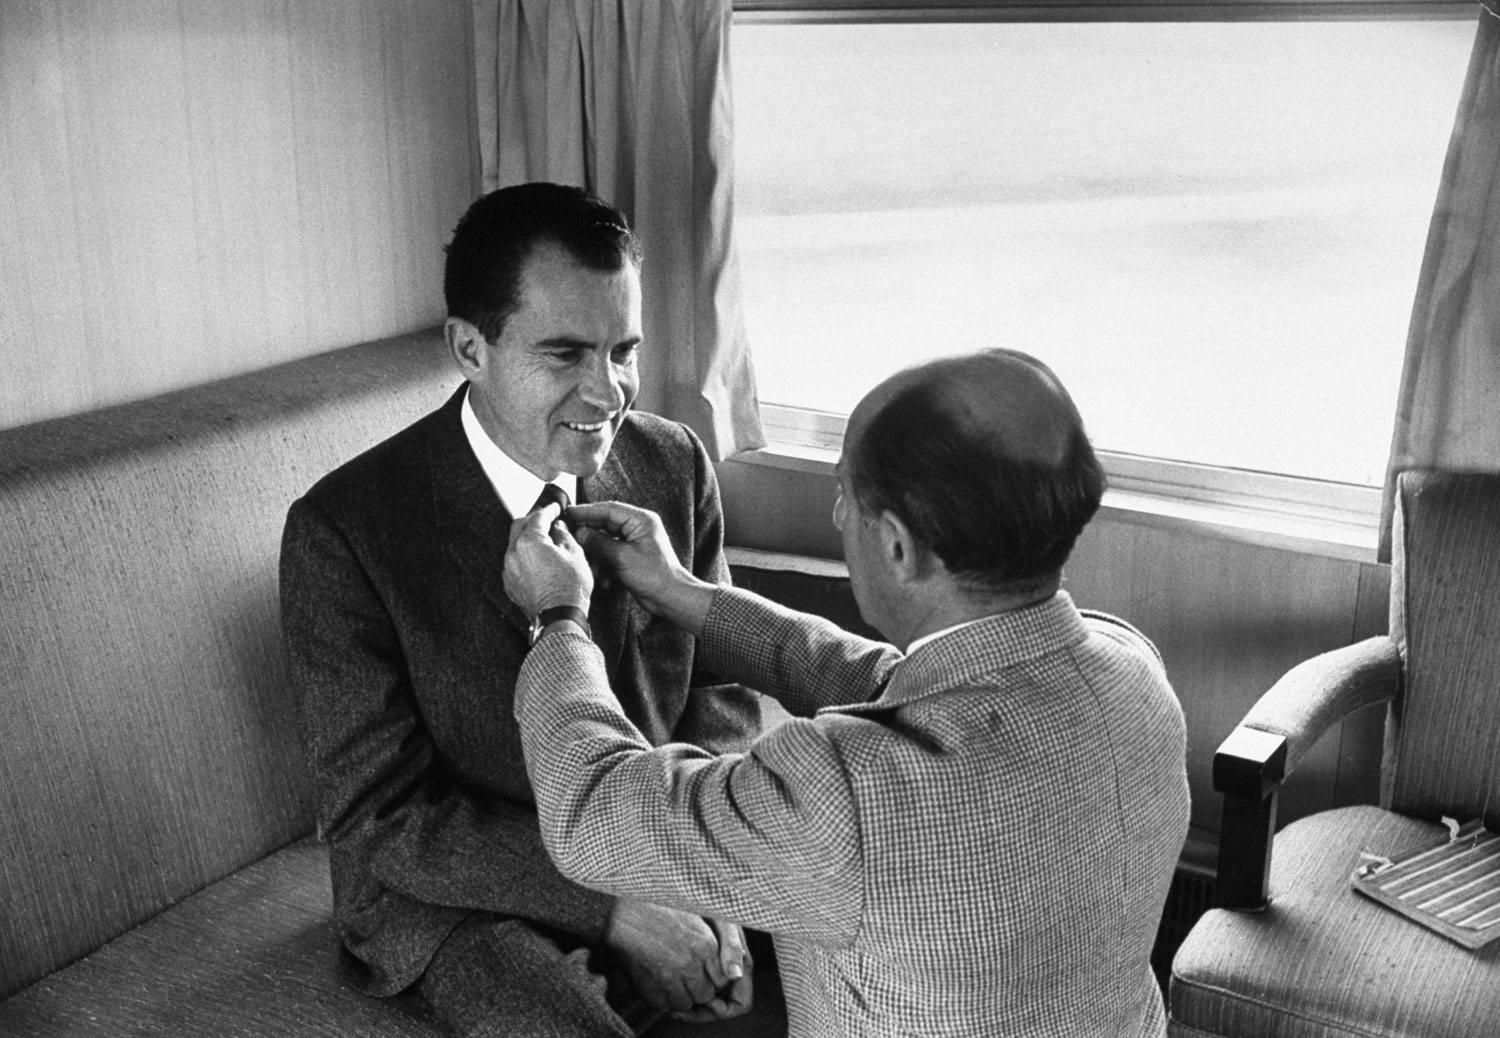 LIFE photographer Alfred Eisenstaedt adjusts Richard Nixon's tie prior to photo shoot during the 1960 presidential campaign.